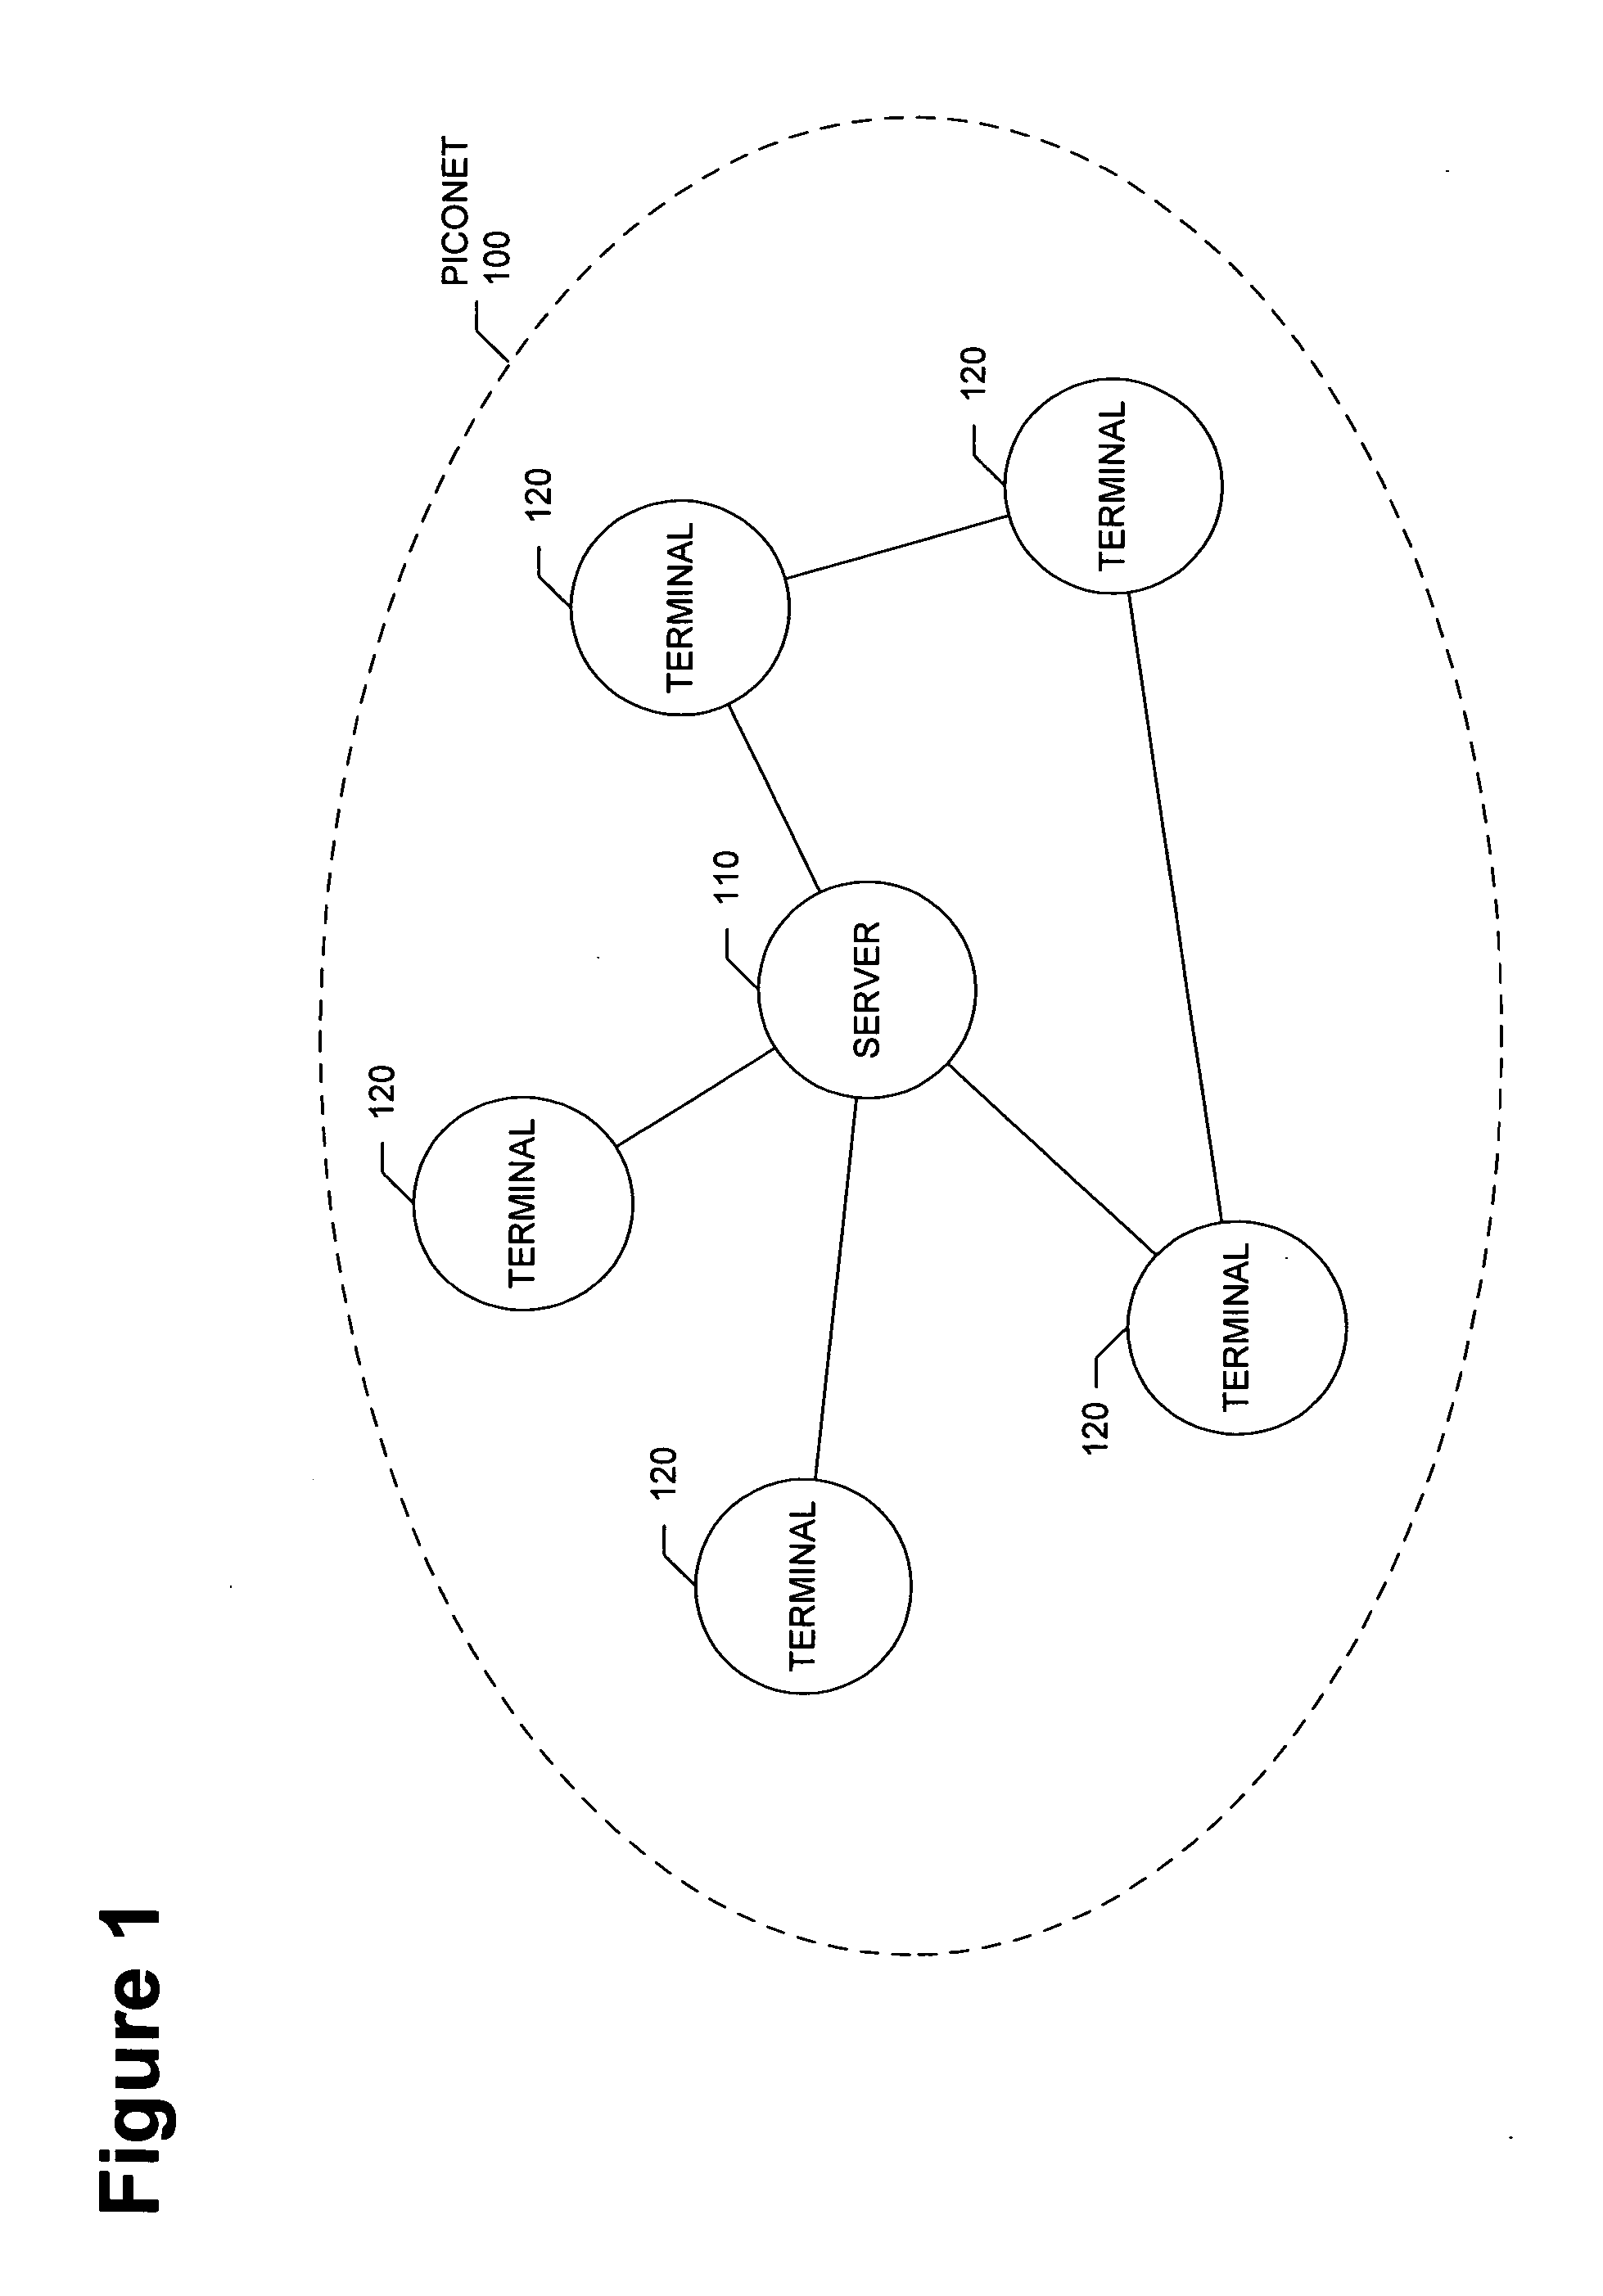 Method of initializing and using a security association for middleware based on physical proximity